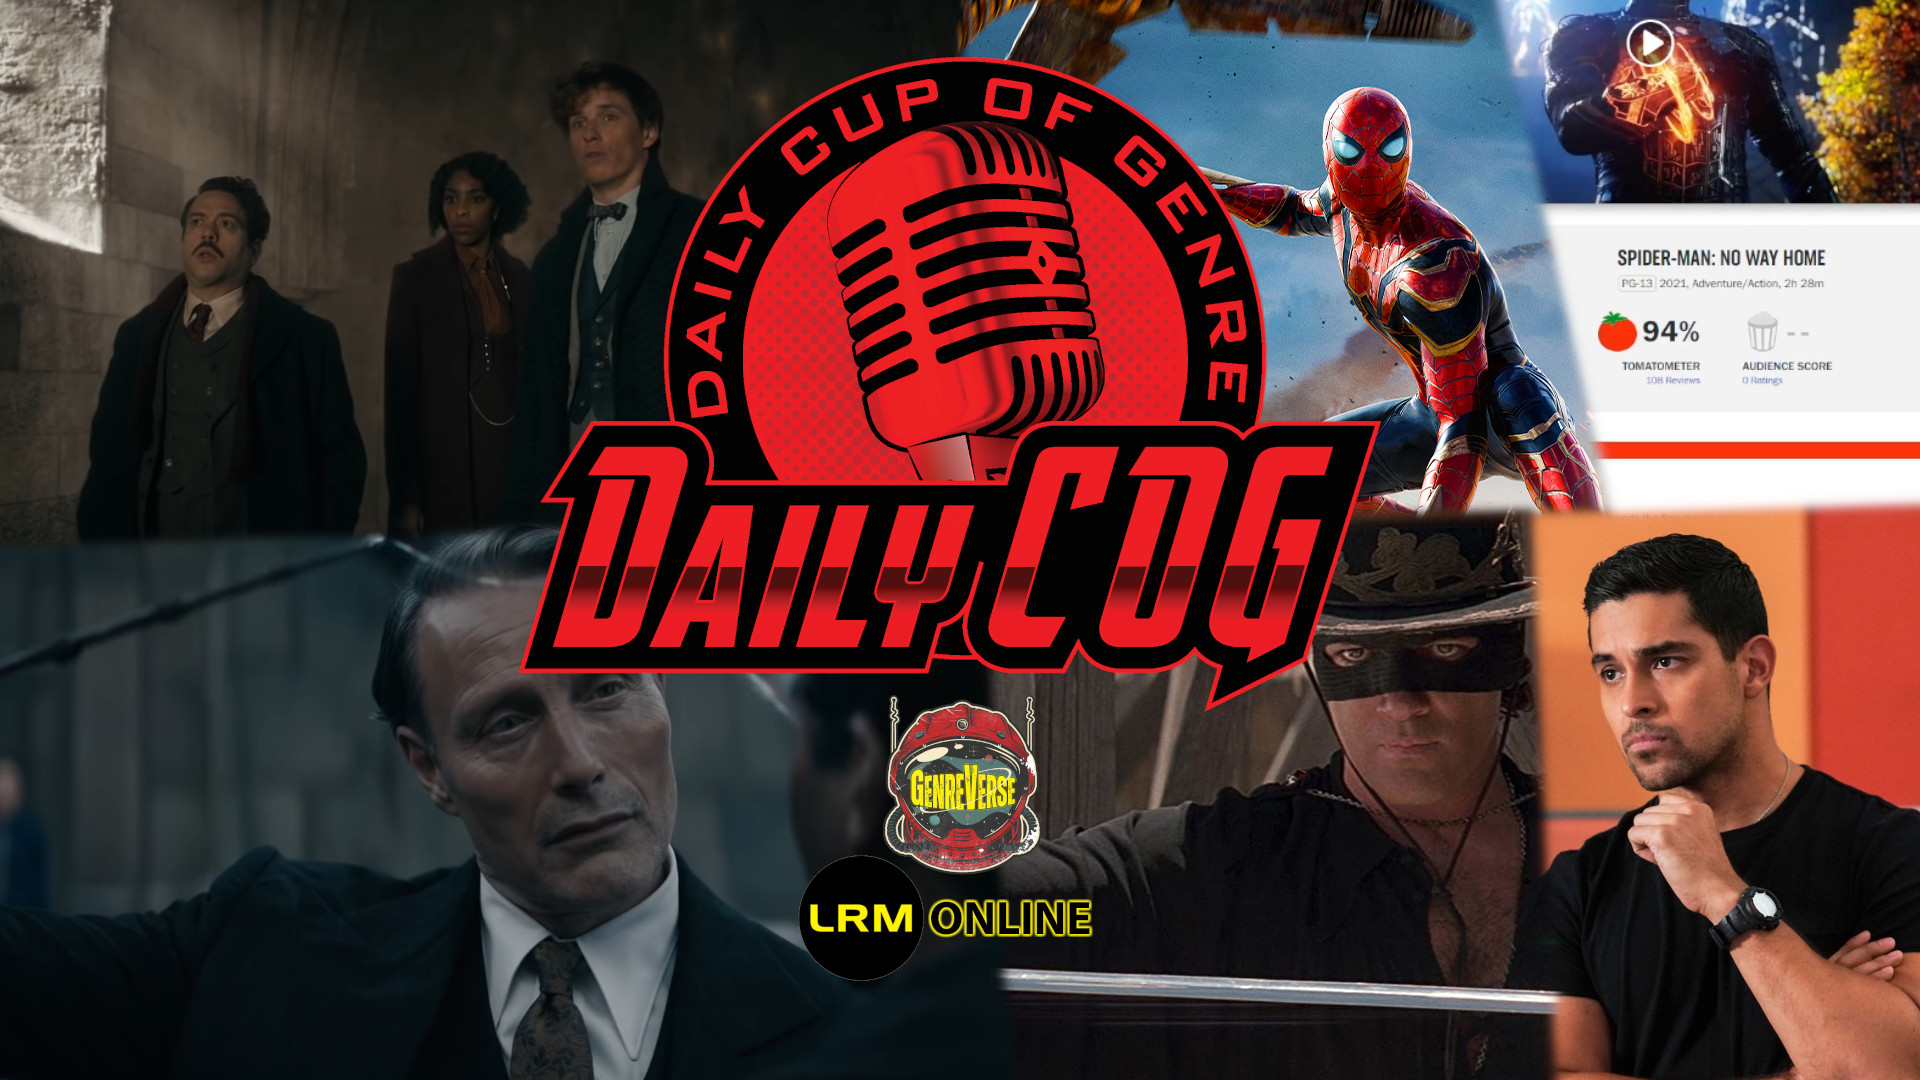 New Zorro Series Coming, Spider-Man: No Way Home First Reviews, Fantastic Beasts: The Secrets of Dumbledore Trailer Reaction | Daily COG